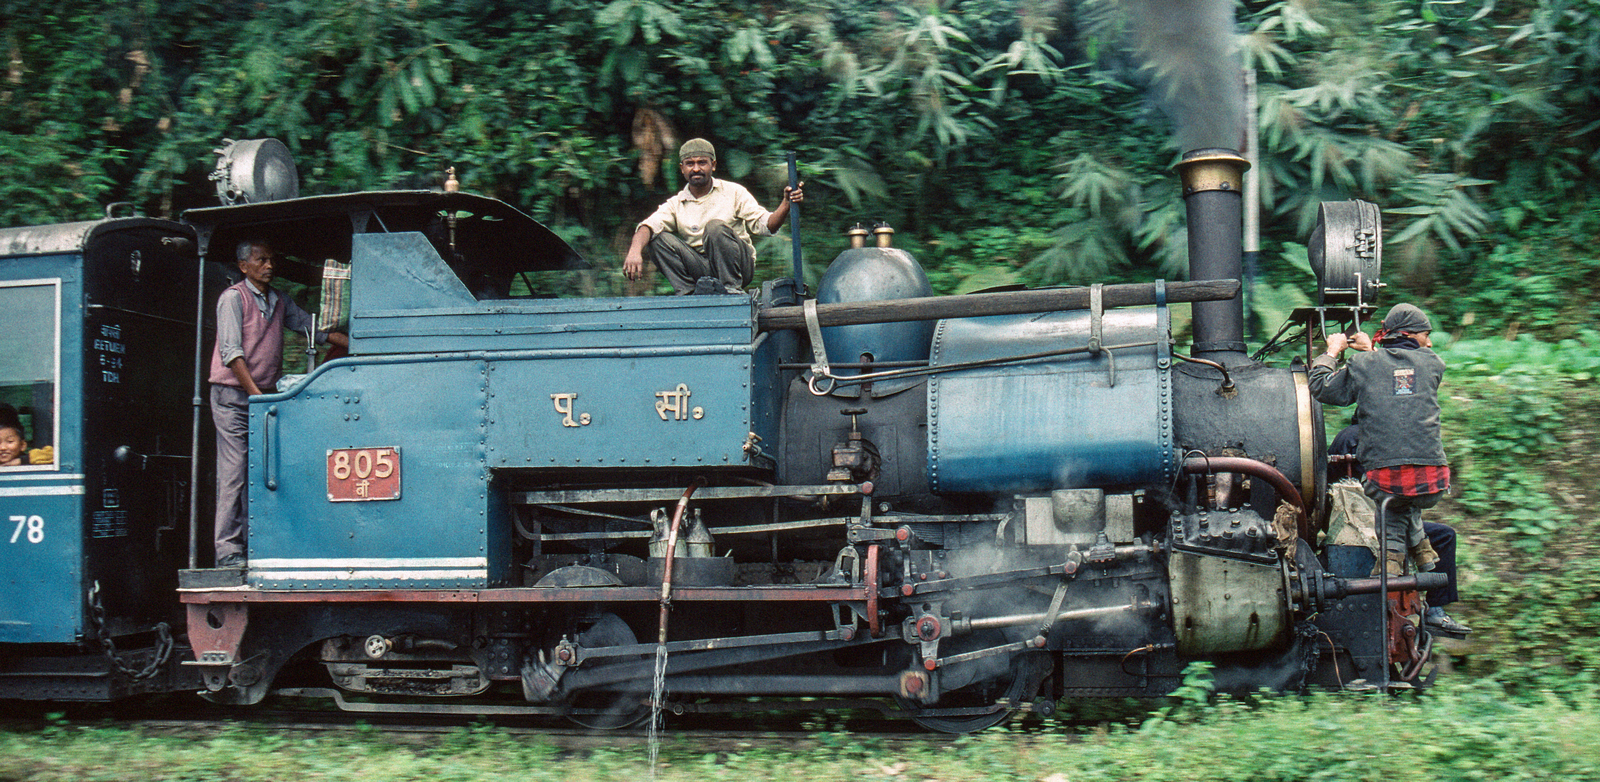 Built in 1925, No. 805 in December 1995 with human sanders at the front and another employee breaking the lumps of coal into manageable pieces as the journey progressed